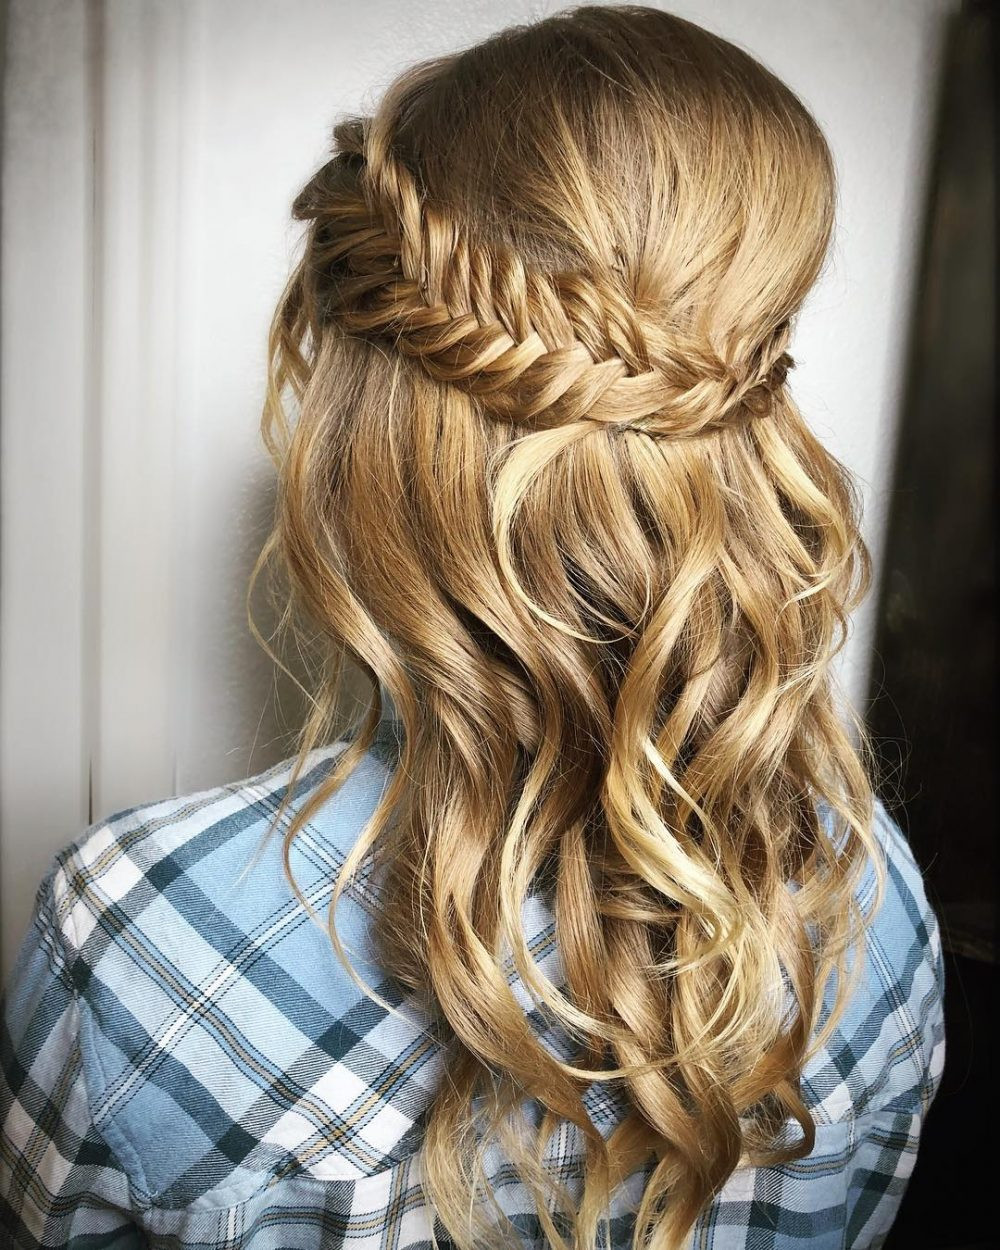 Prom Hairstyles For Short Hair Half Up Half Down
 Half Up Half Down Prom Hairstyles and How To s